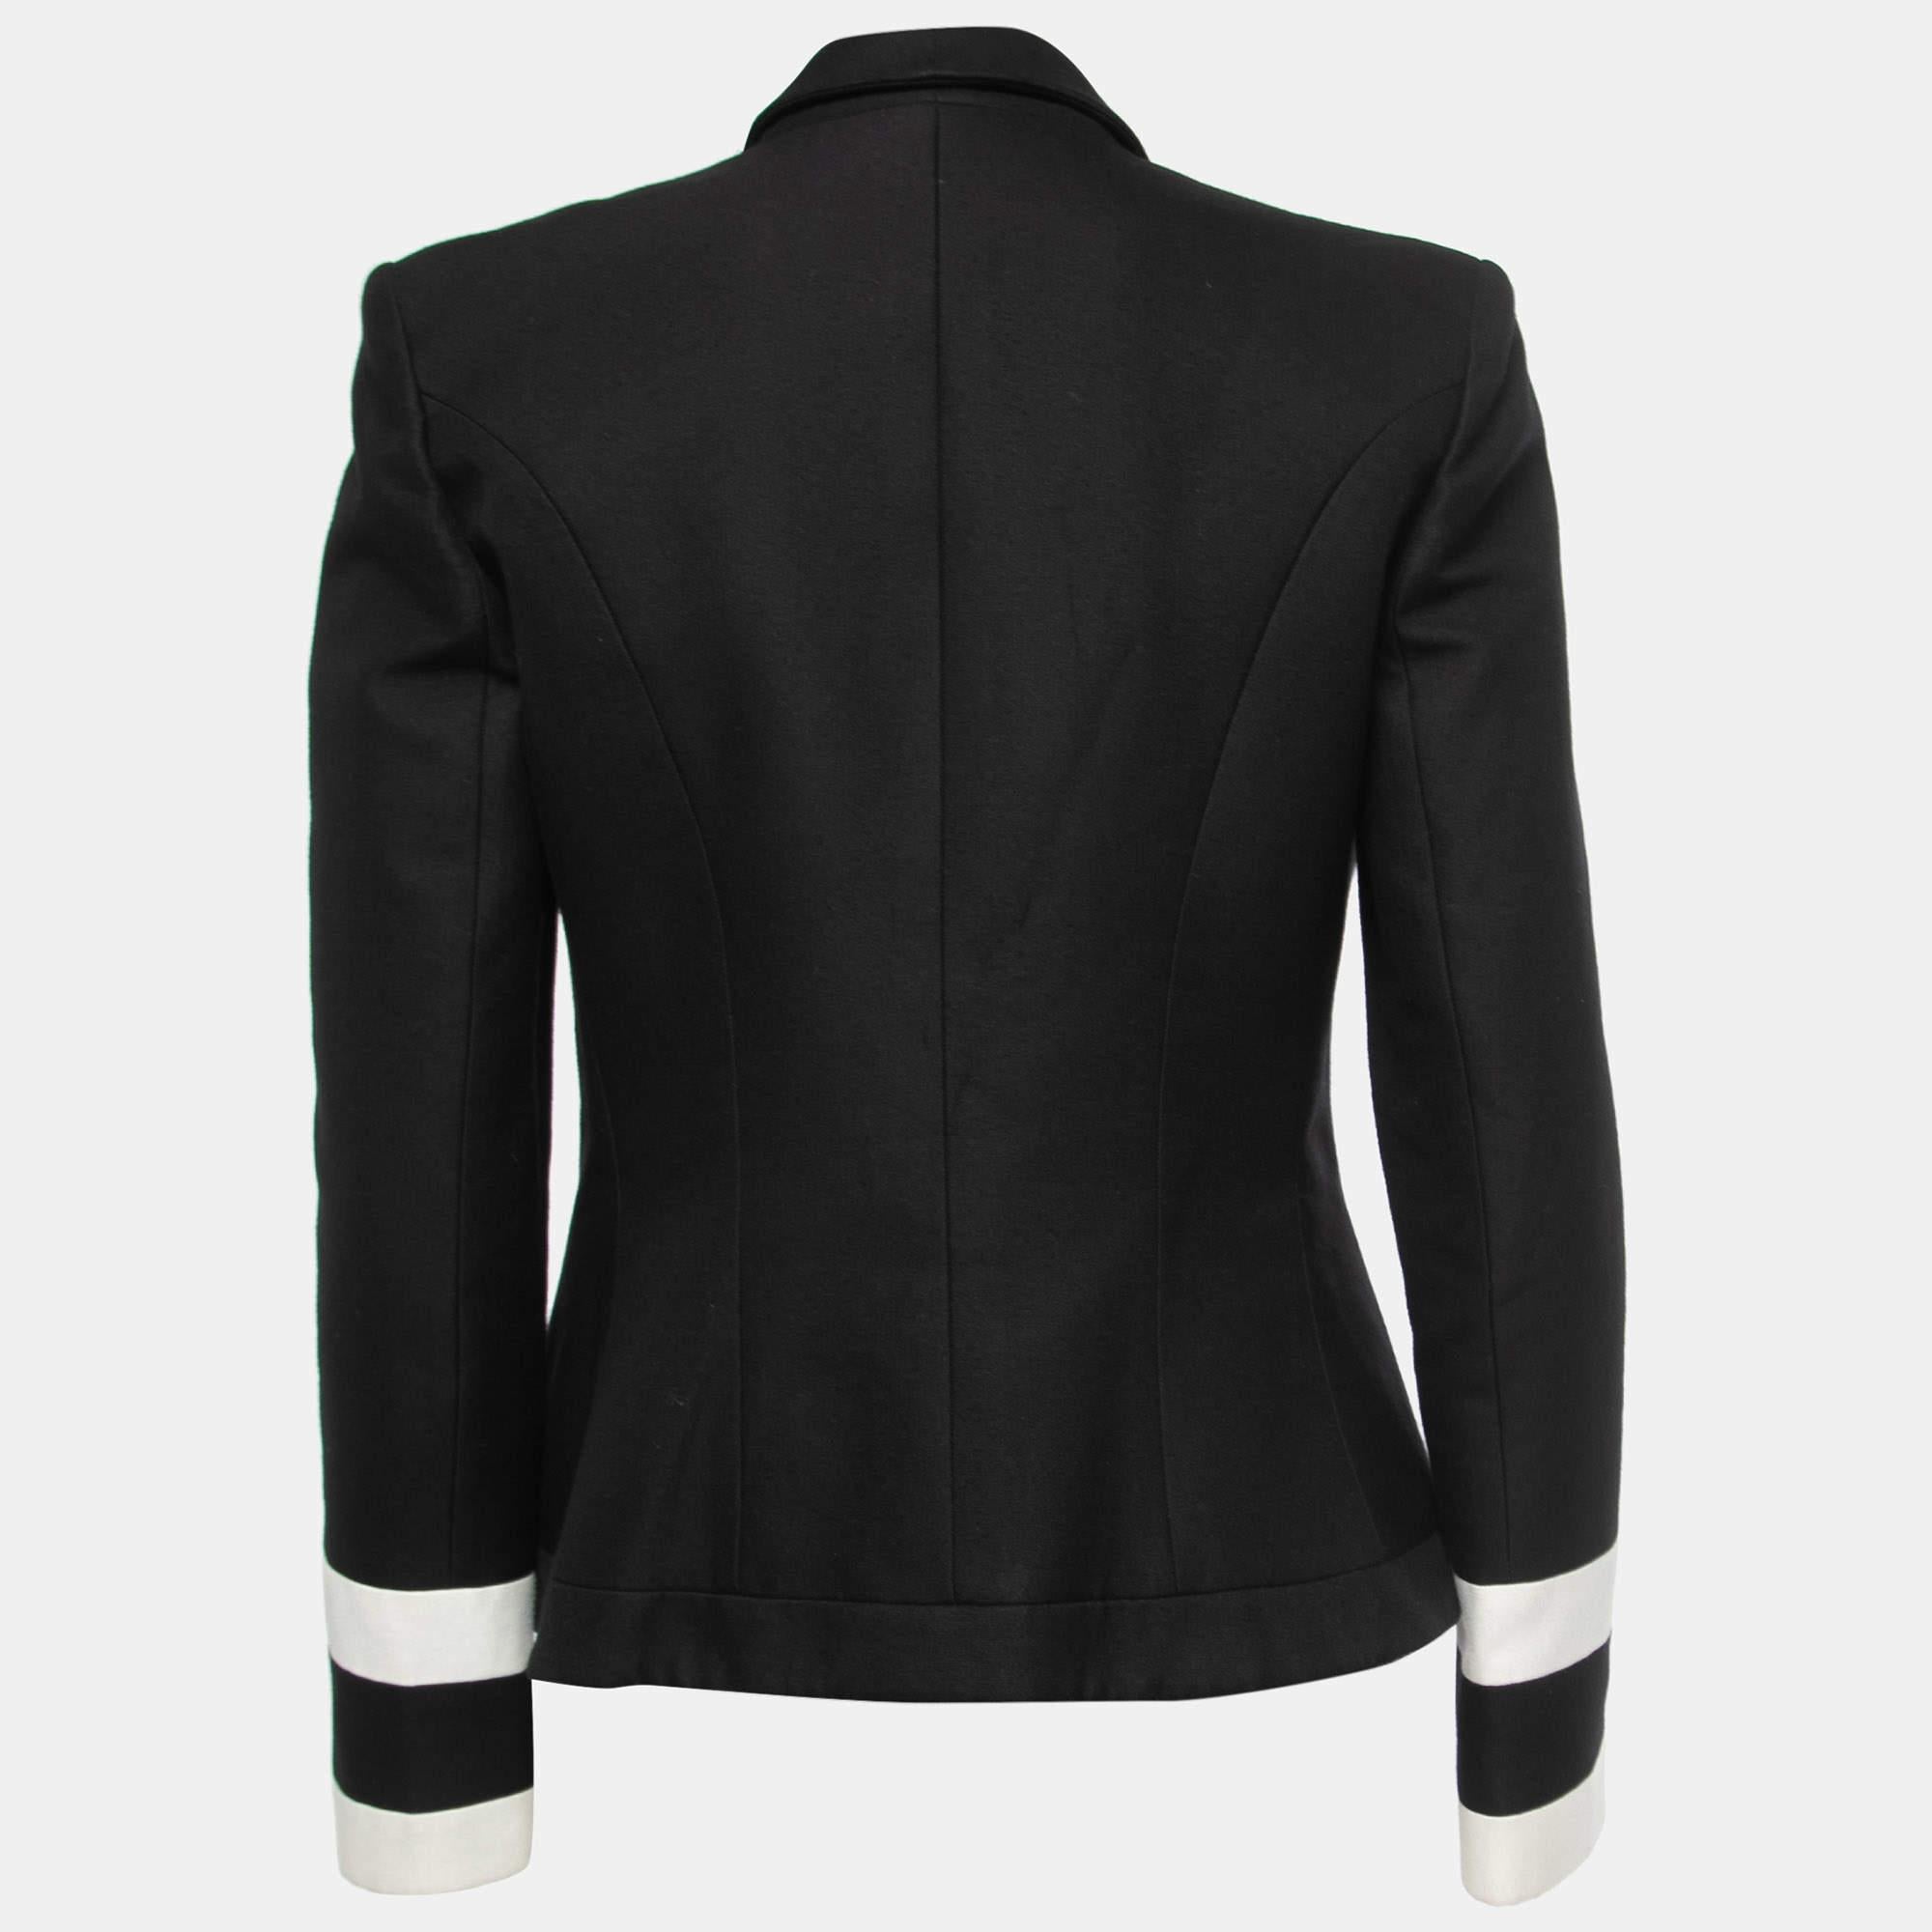 This blazer brings you both class and luxury as you wear it. It is highlighted with long sleeves, thus granting a polished finish.

